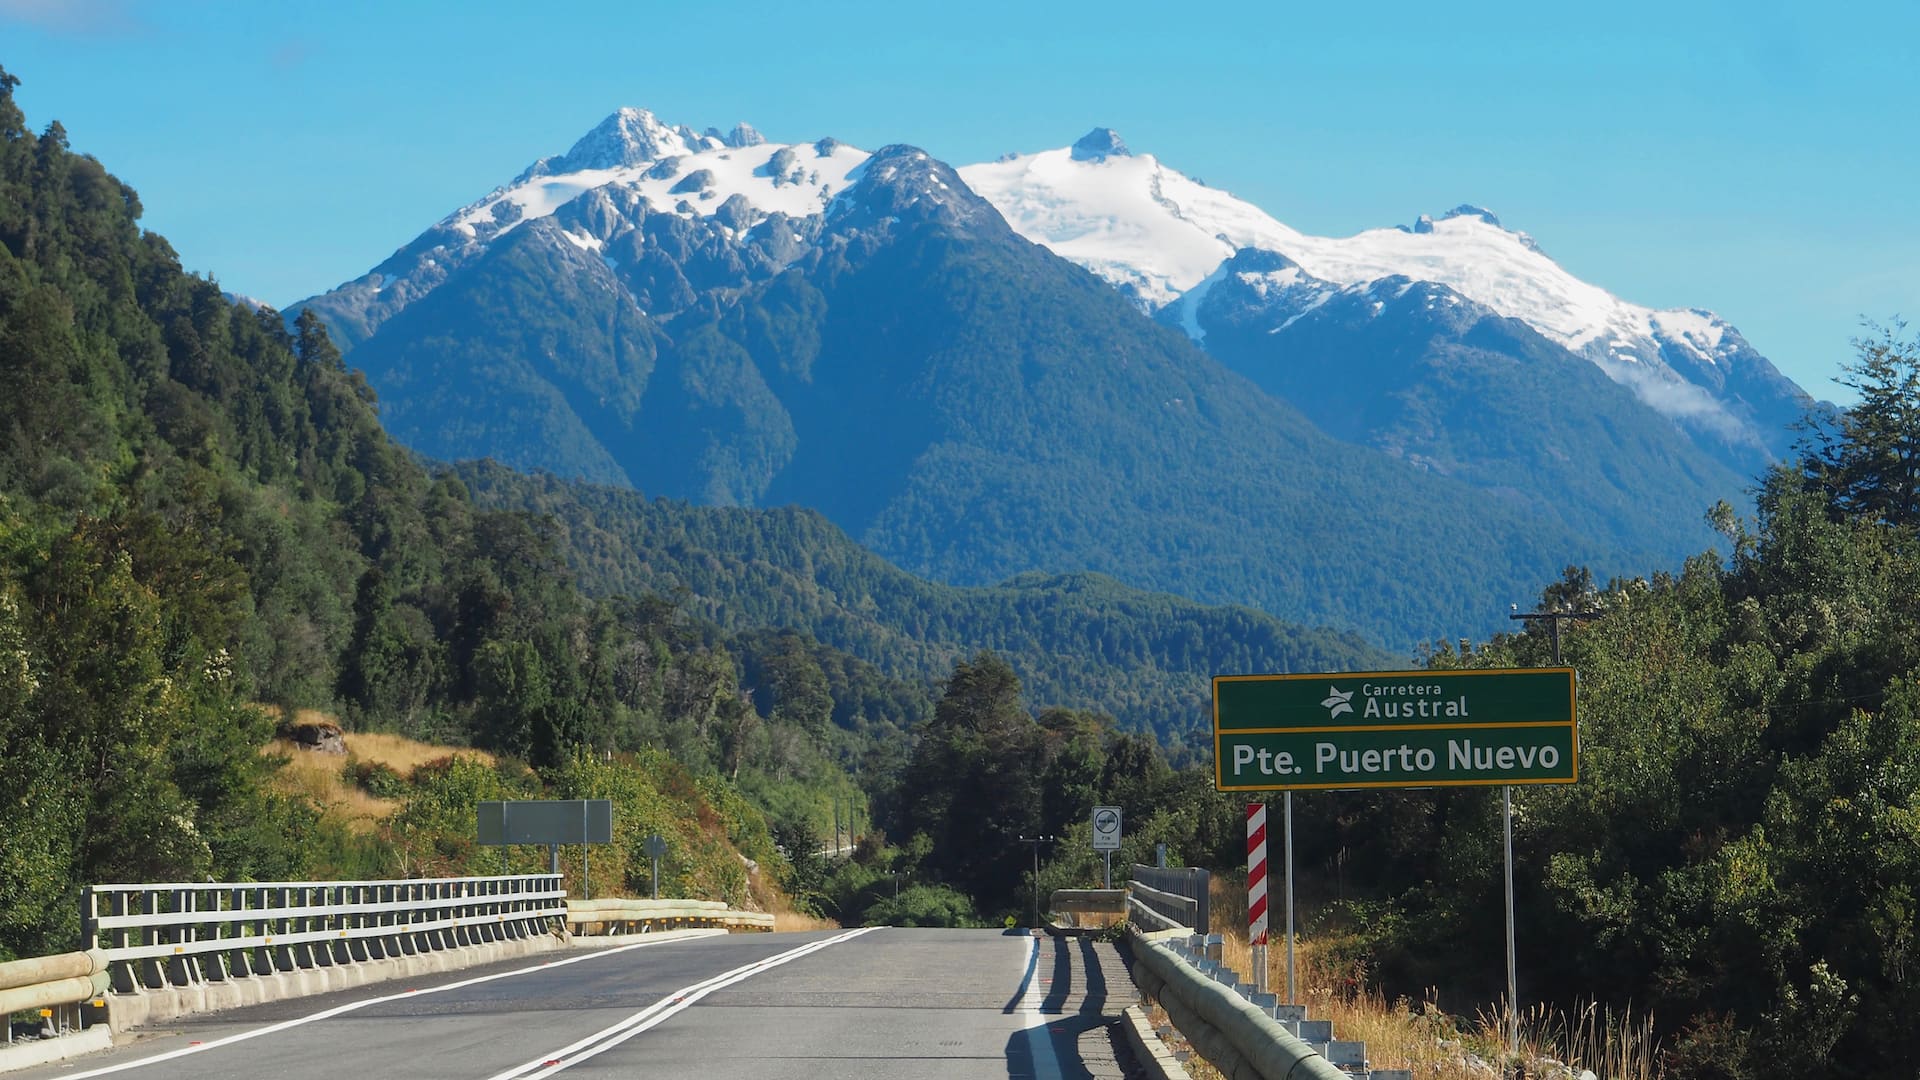 A green road sign stands beside a tarmac road with trees and a snow-capped mountain in the background